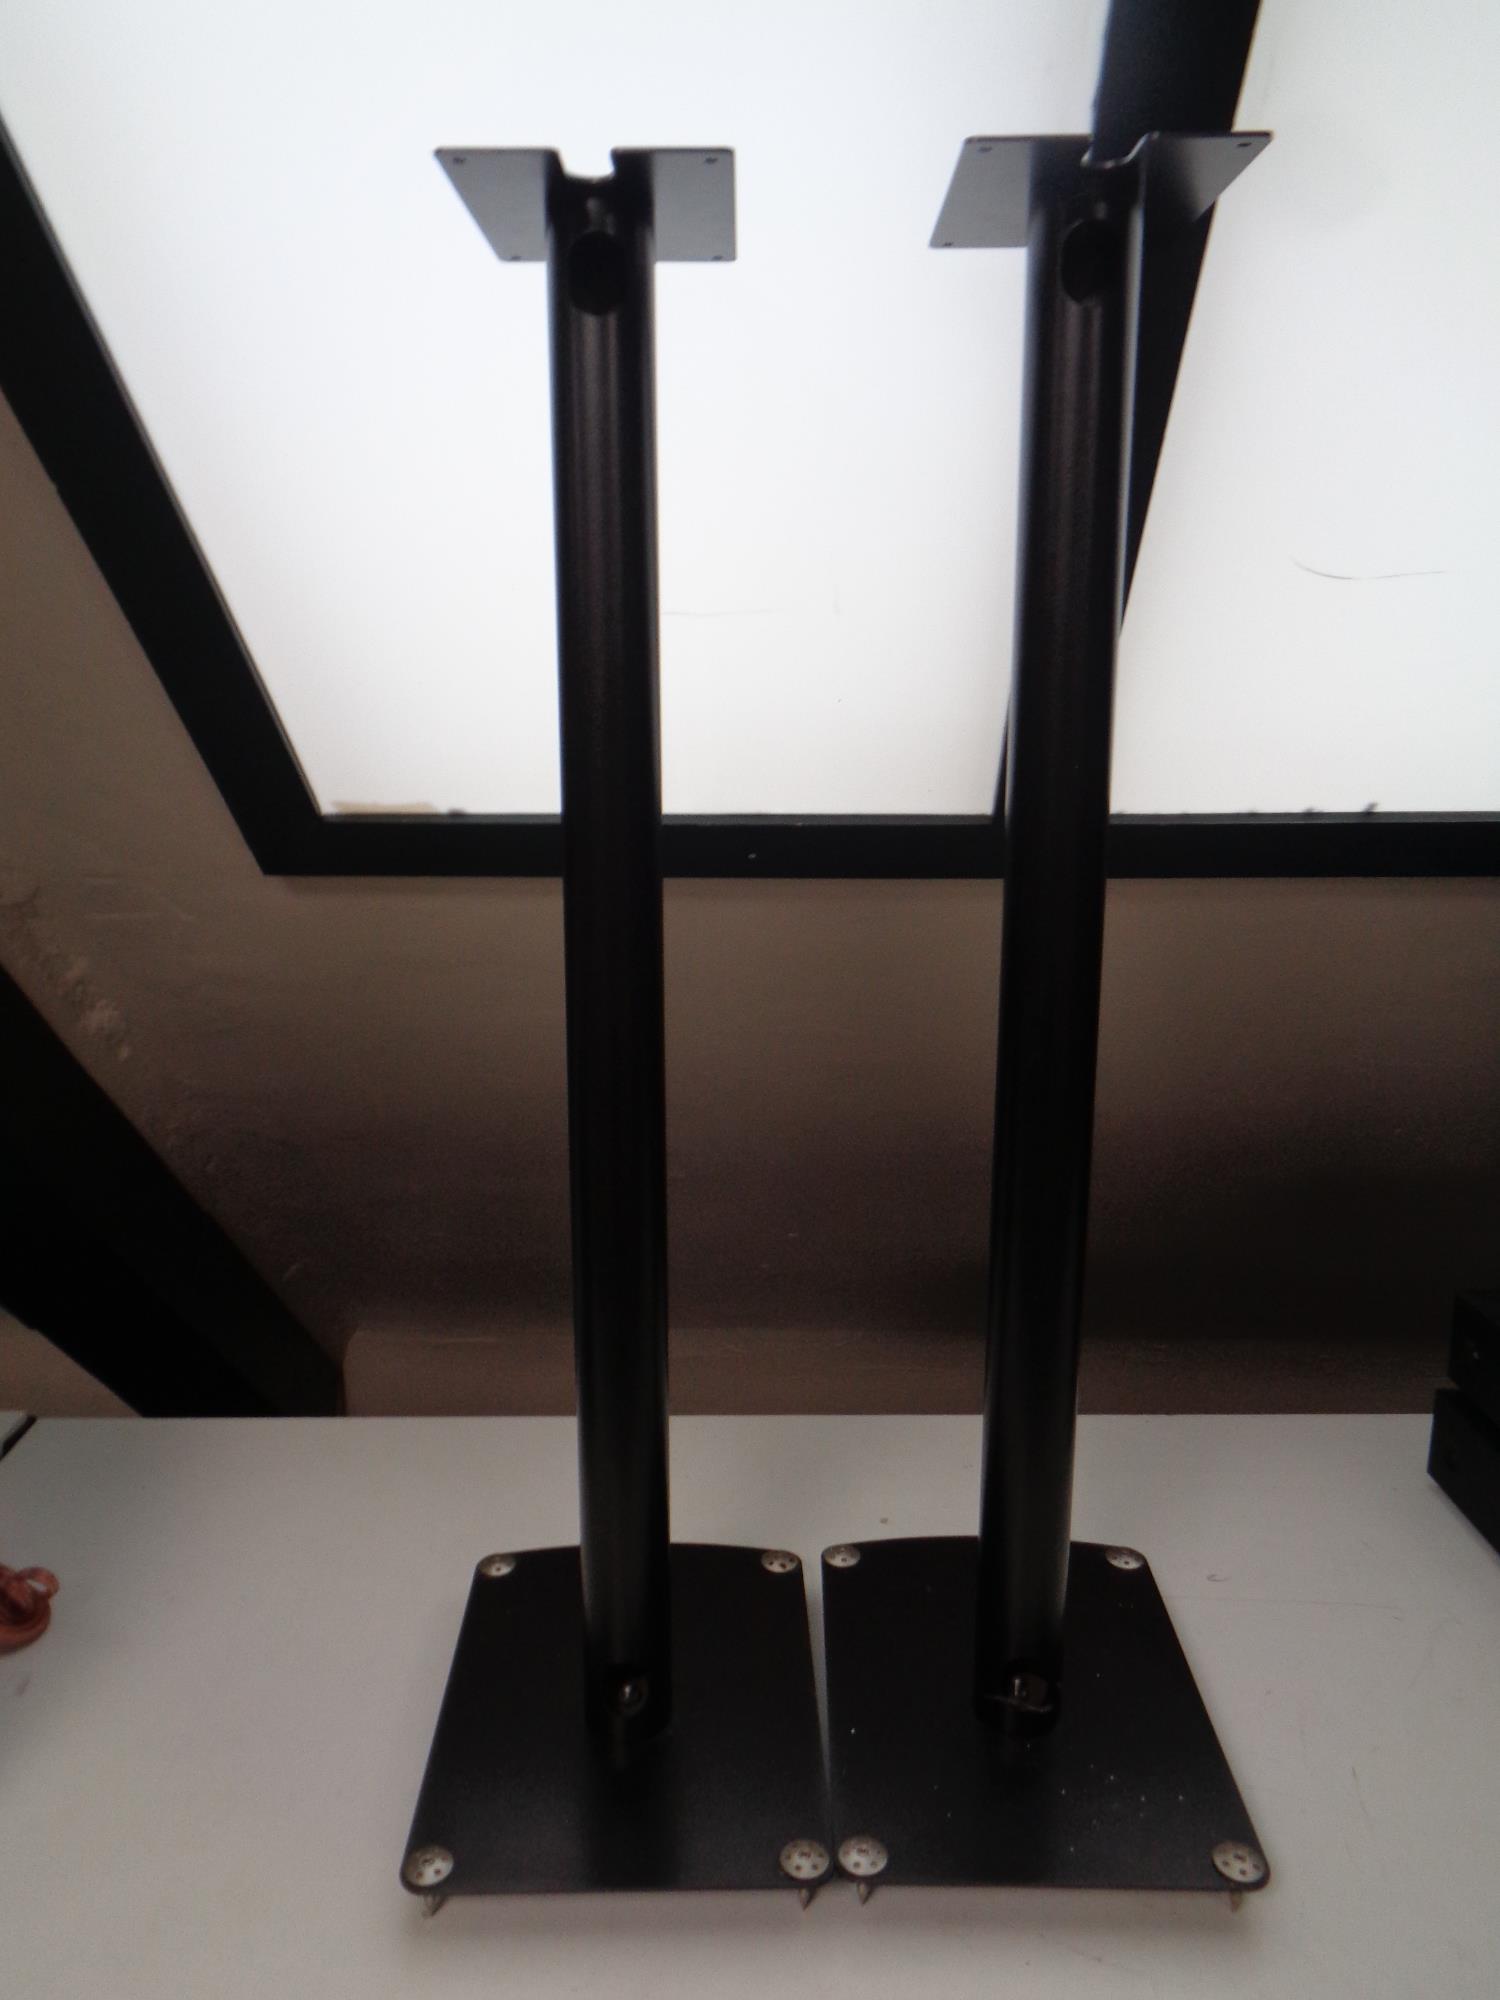 A pair of Mordaunt Short speakers on speaker stands - Image 2 of 2